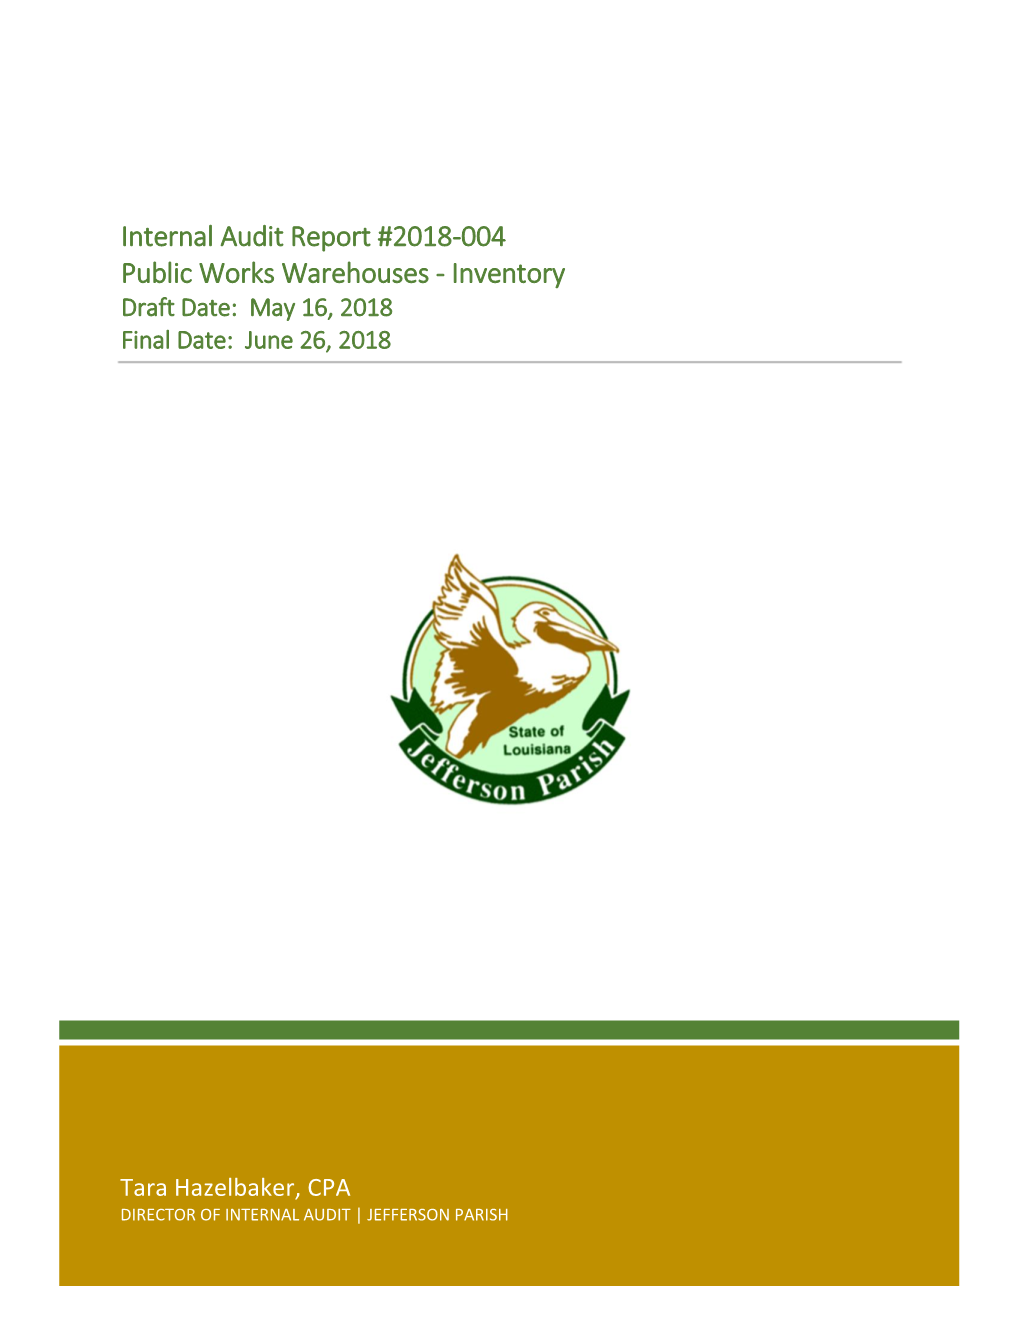 Internal Audit Report #2018-004 Public Works Warehouses - Inventory Draft Date: May 16, 2018 Final Date: June 26, 2018